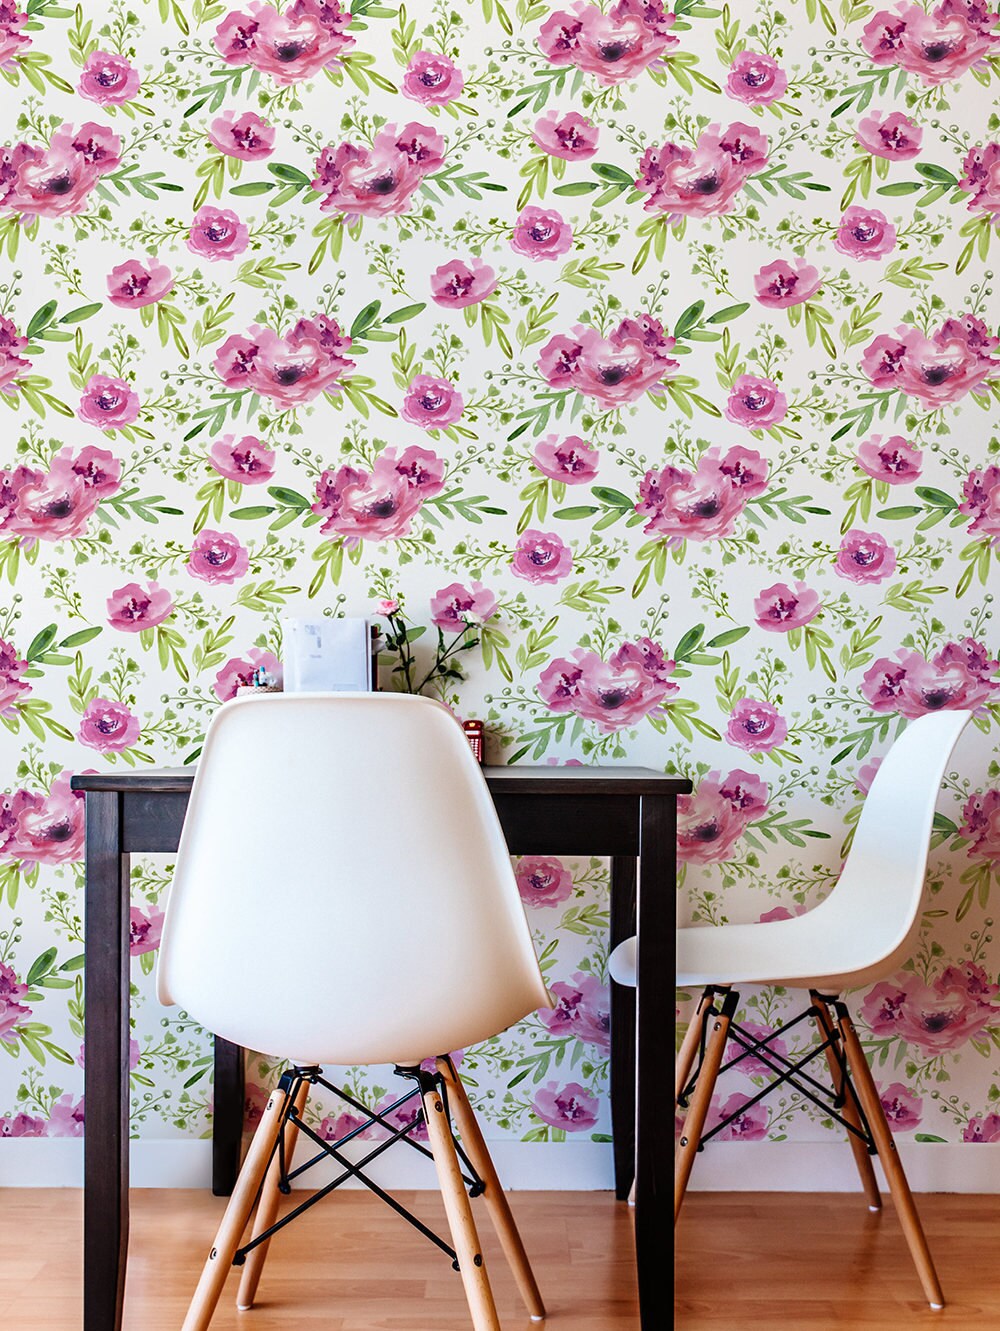 Flower Self Adhesive Wallpaper Floral Removable Wallpaper